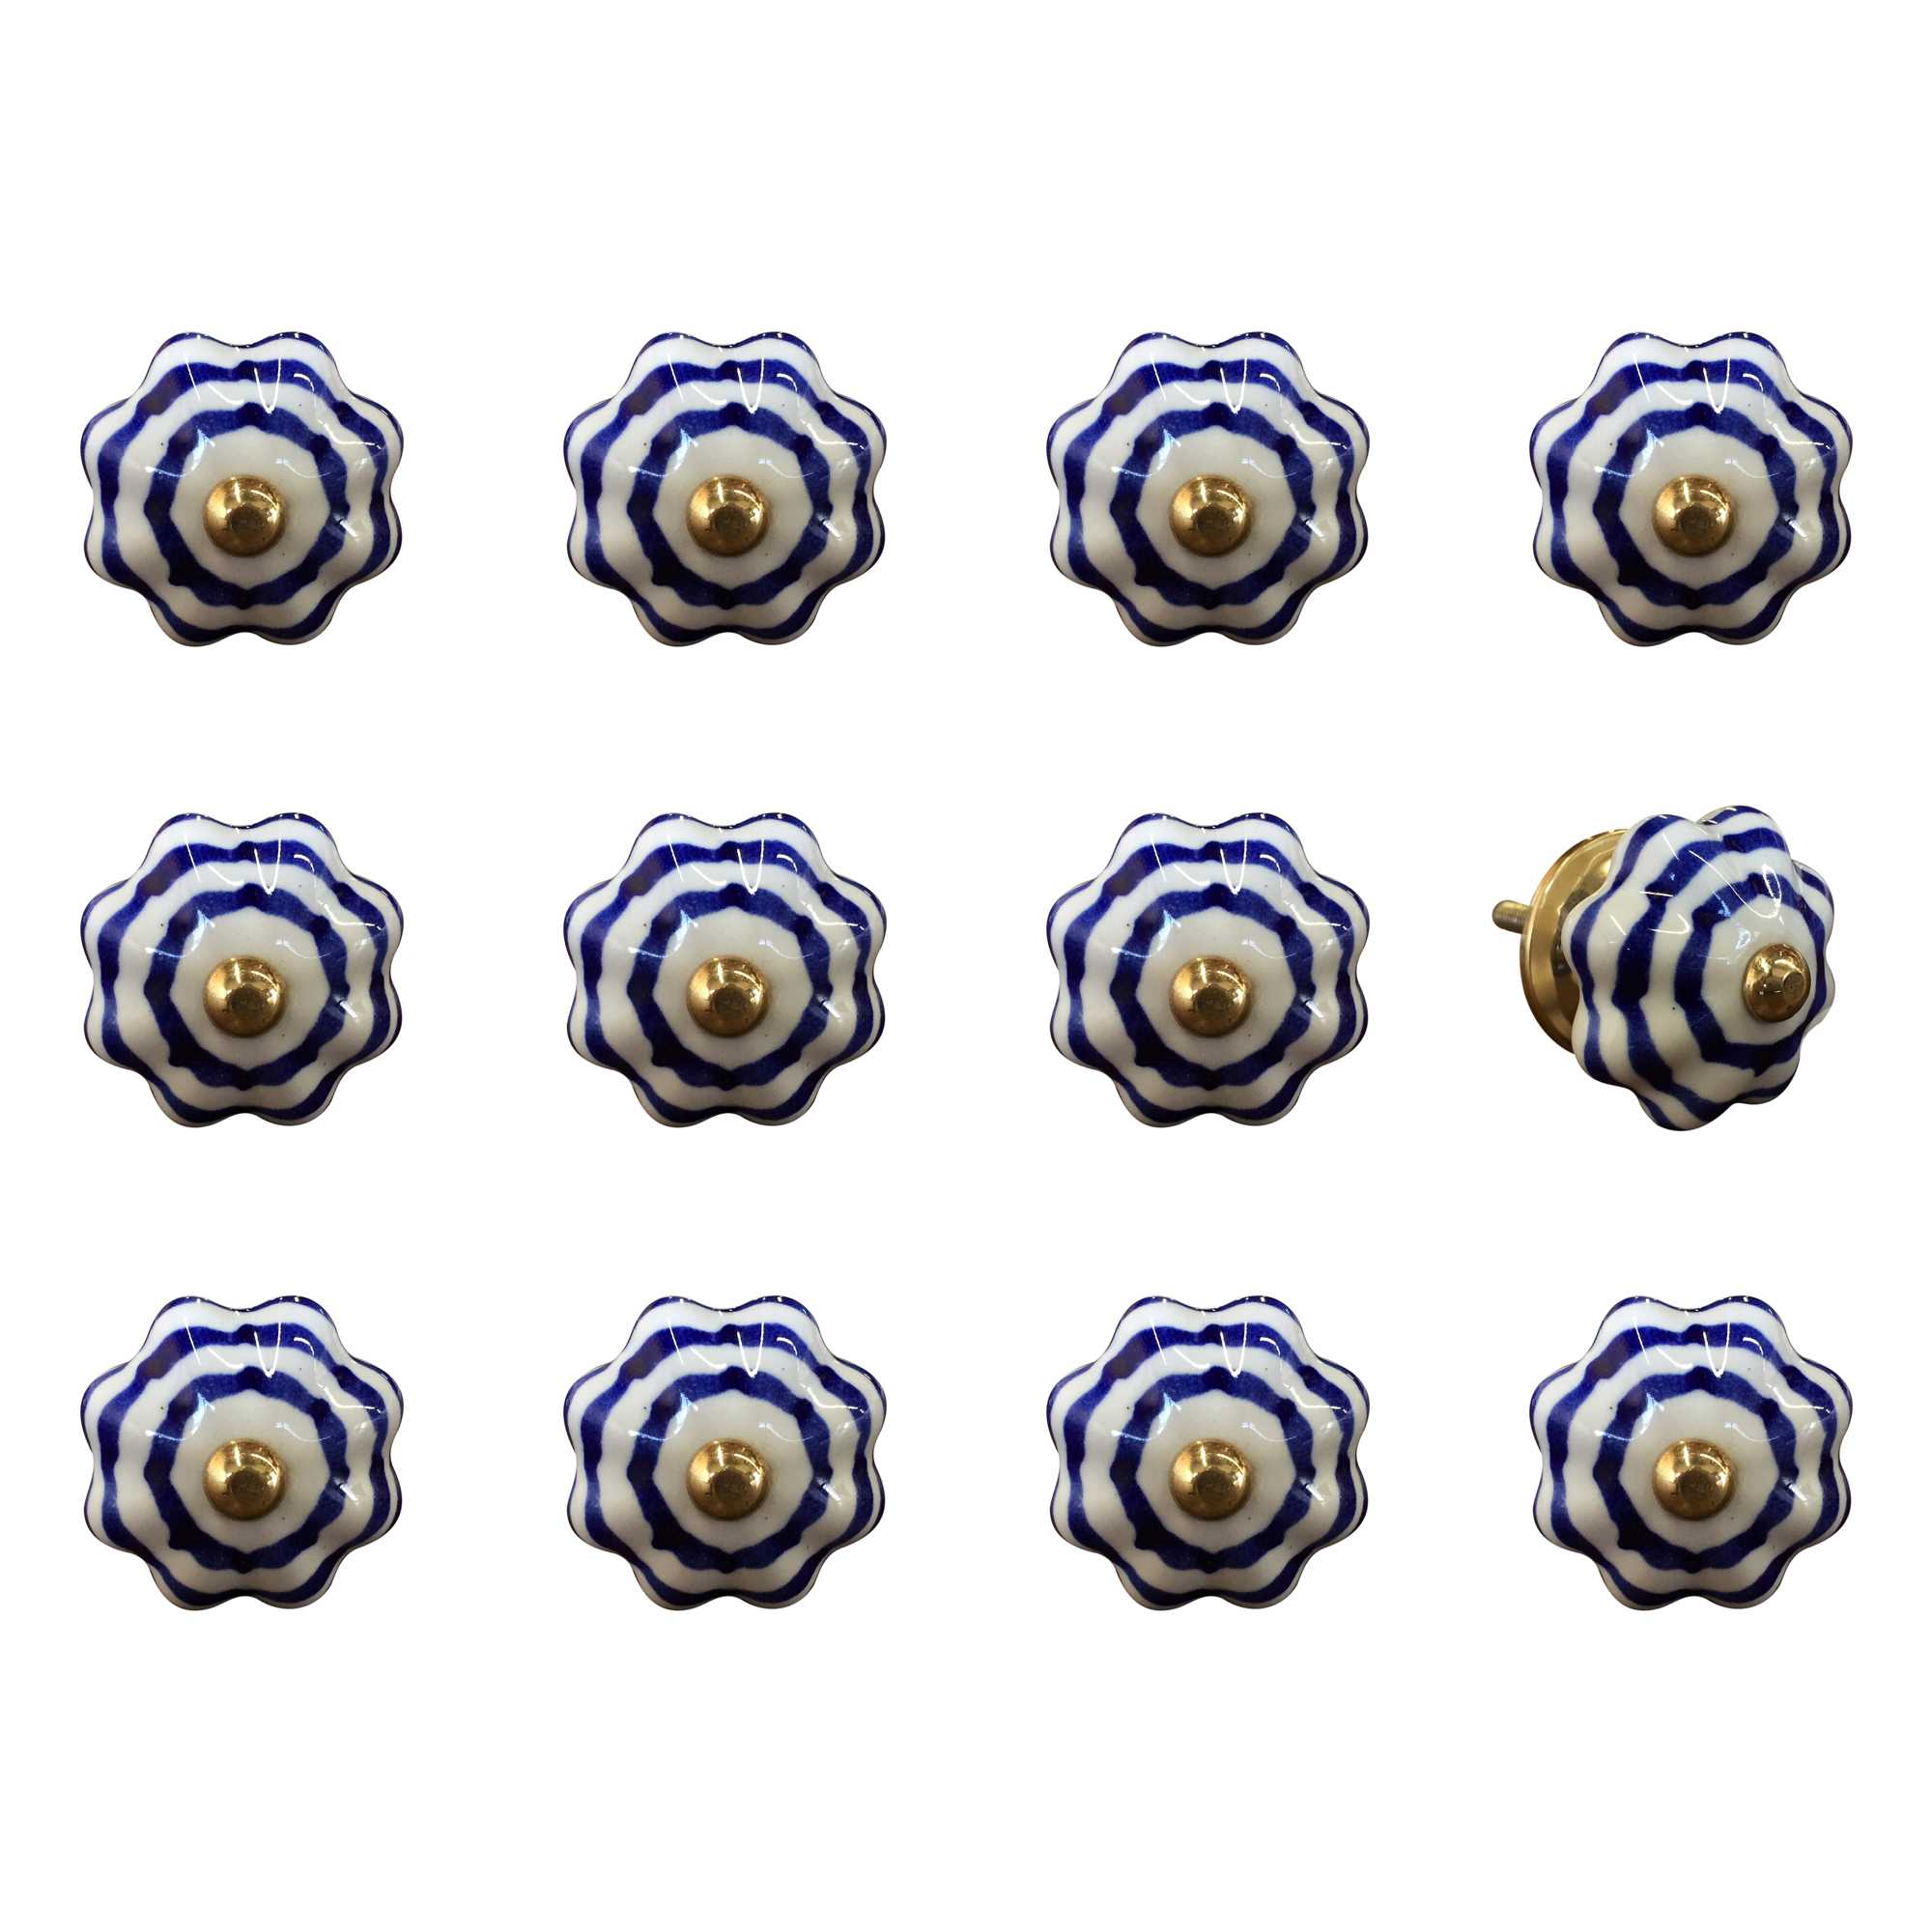 1.5" x 1.5" x 1.5" White, Blue and Copper - Knobs 12-Pack